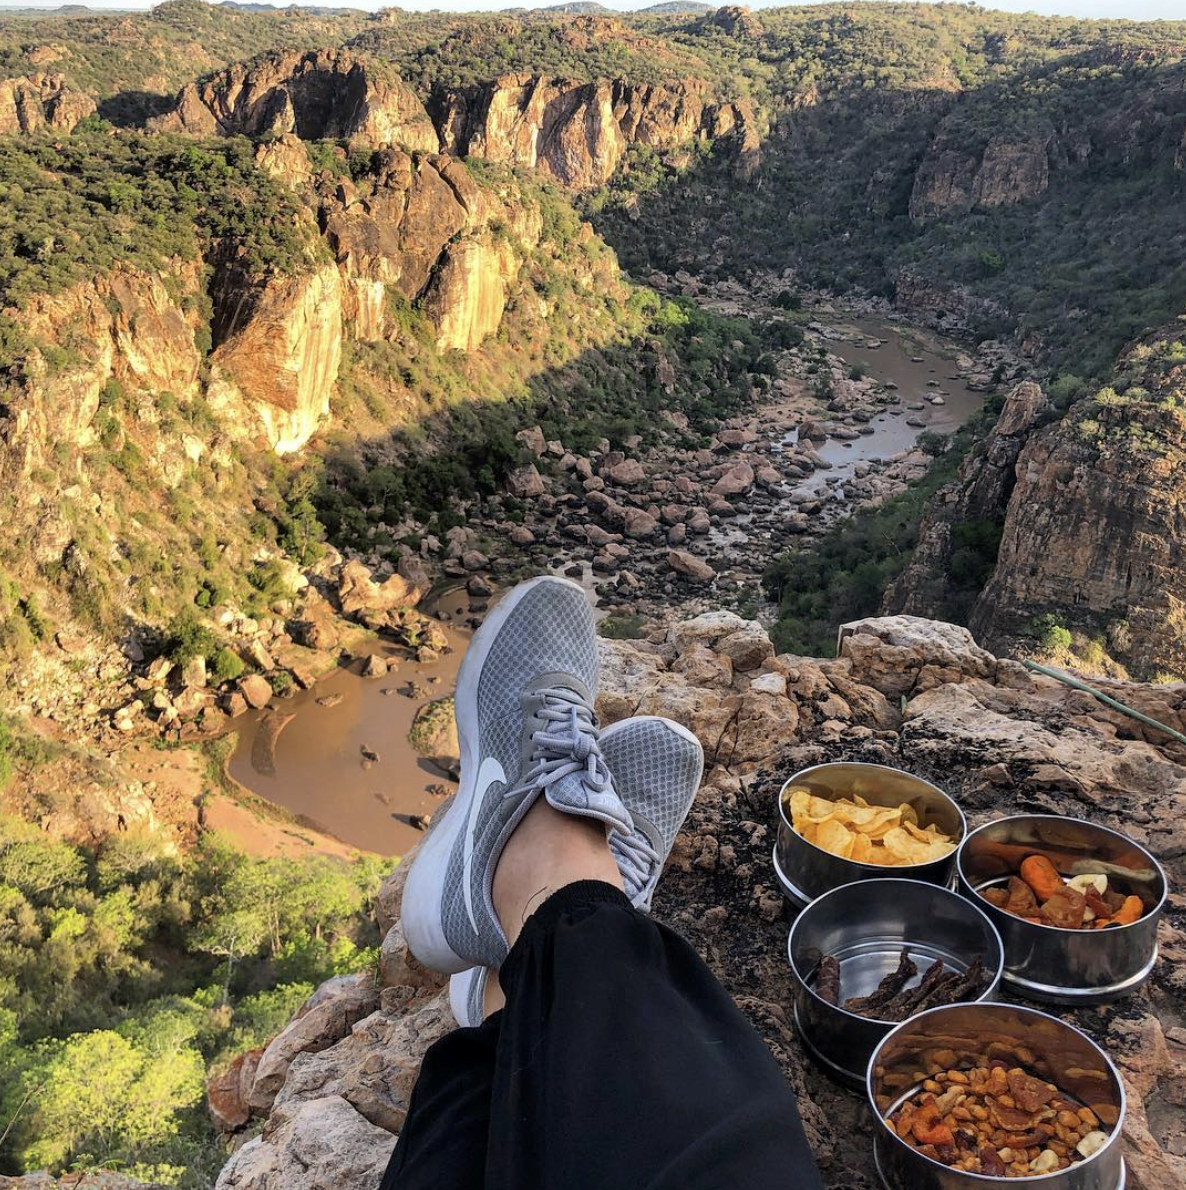 Lanner Gorge is one of our favourite spots for sundowners. @liandi7 is pictured here soaking up the last rays of the day in the best possible way – with a drink in hand and snacks at the ready.